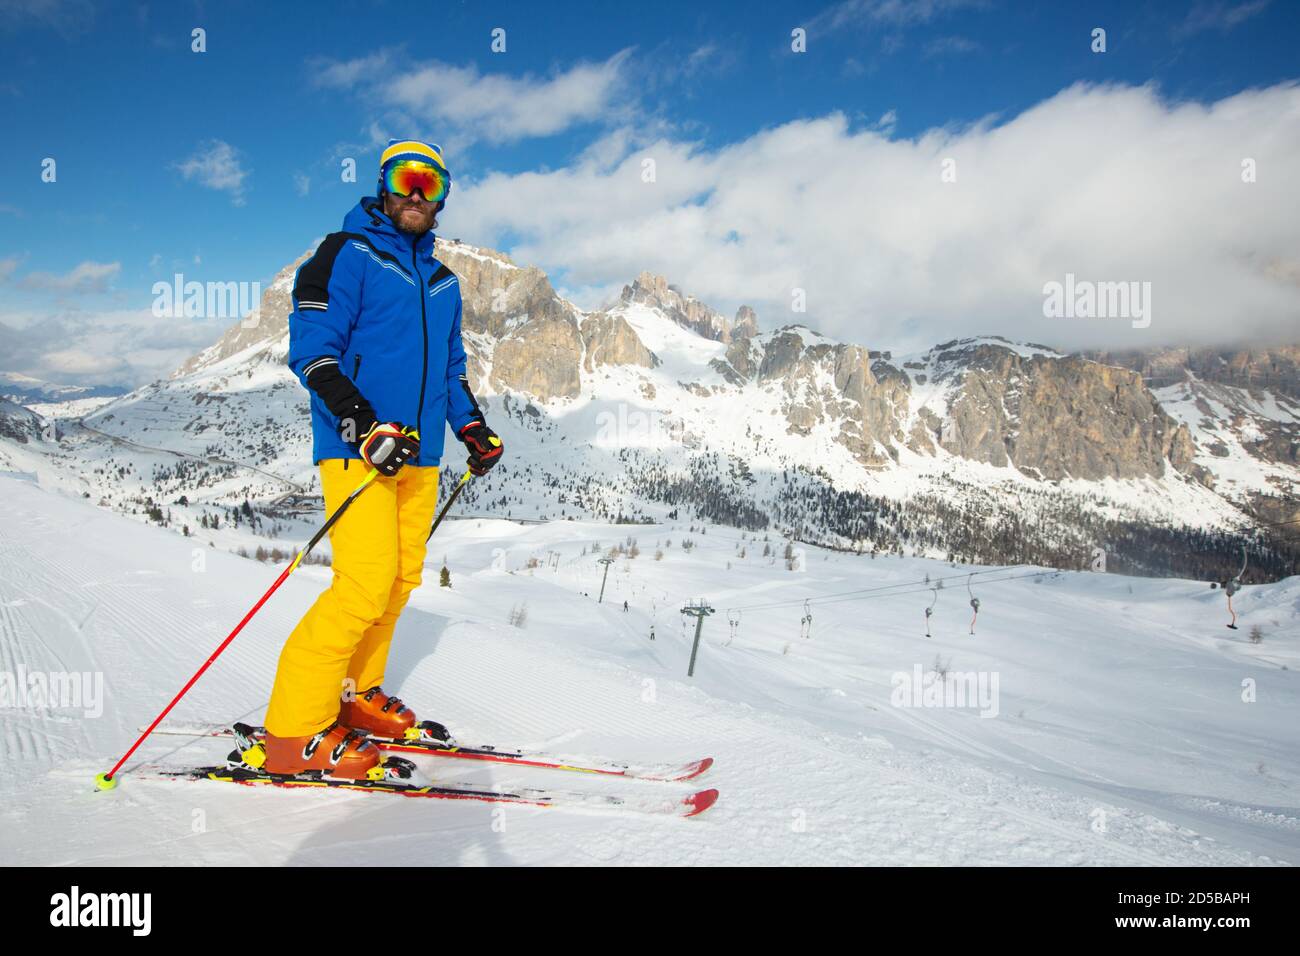 Alpine skier stand on slope in winter mountains Dolomites Italy in beautiful alps Cortina d'Ampezzo Col Gallina mountain peaks famous landscape skiing Stock Photo